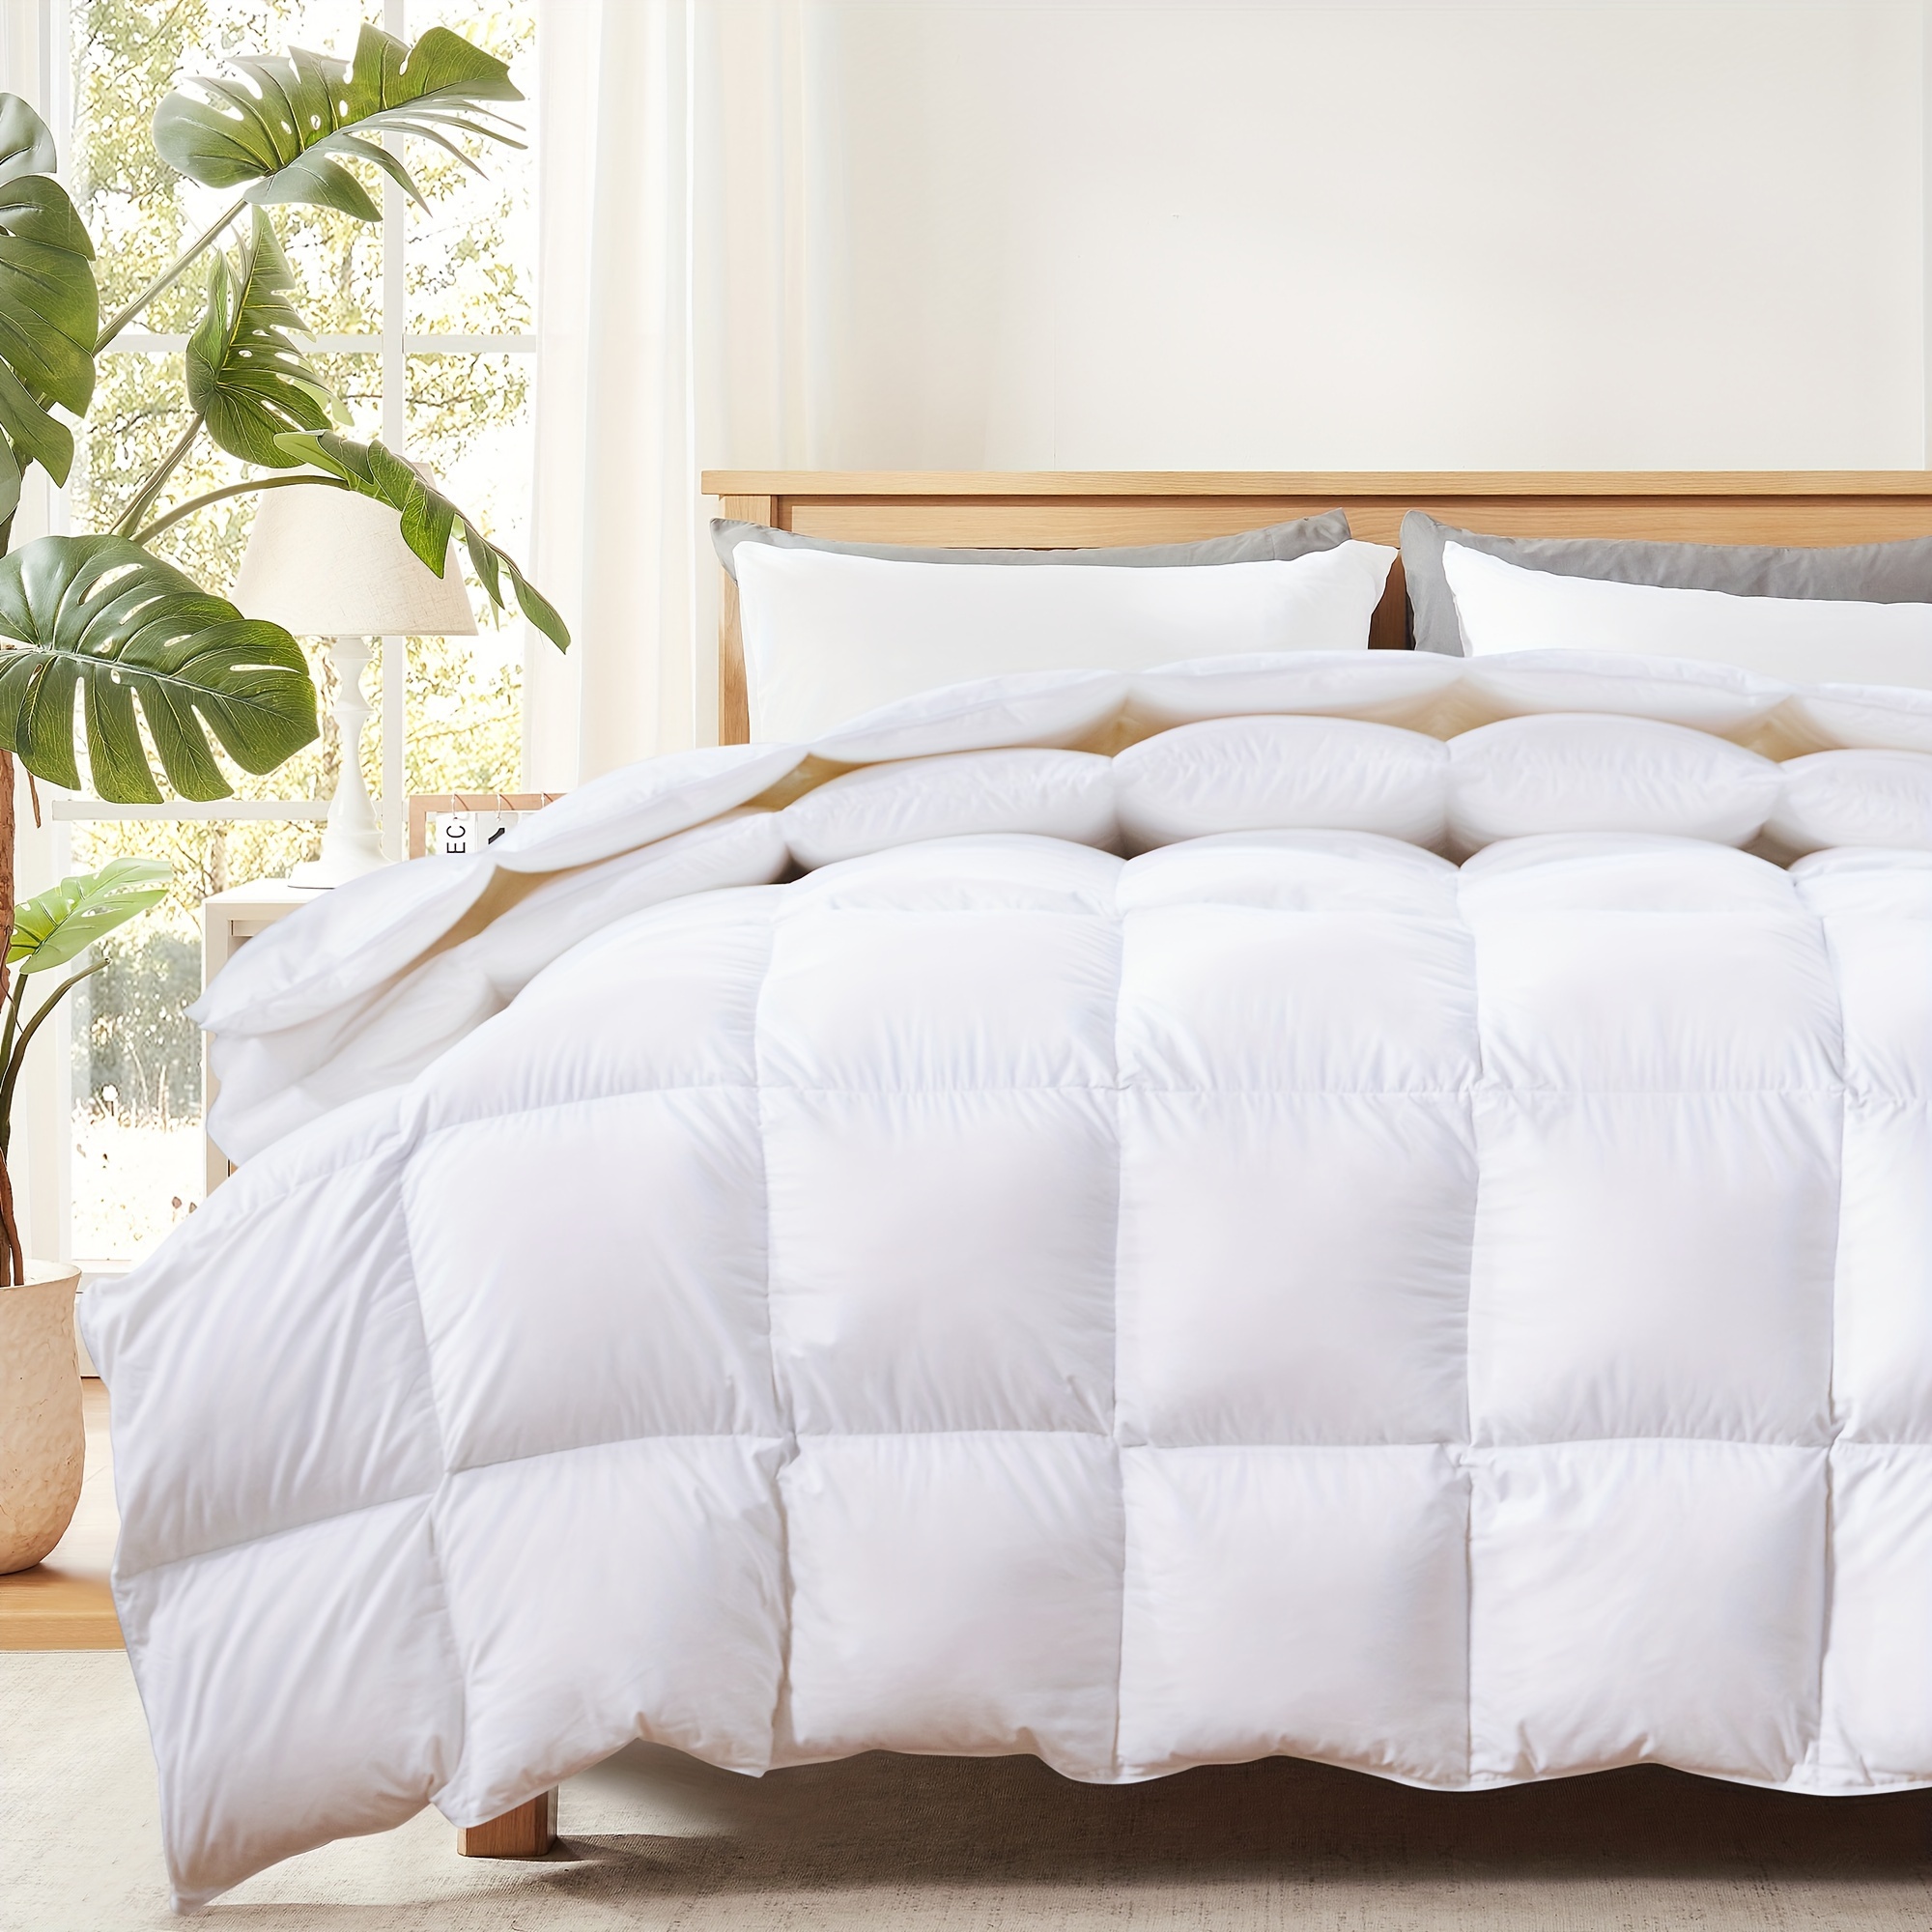 

King Size Feather Comforter Filled With - All Season White King Size Duvet Insert- Luxurious Hotel Bedding Comforters With 100% Cotton Cover - King 106 X 90 Inch